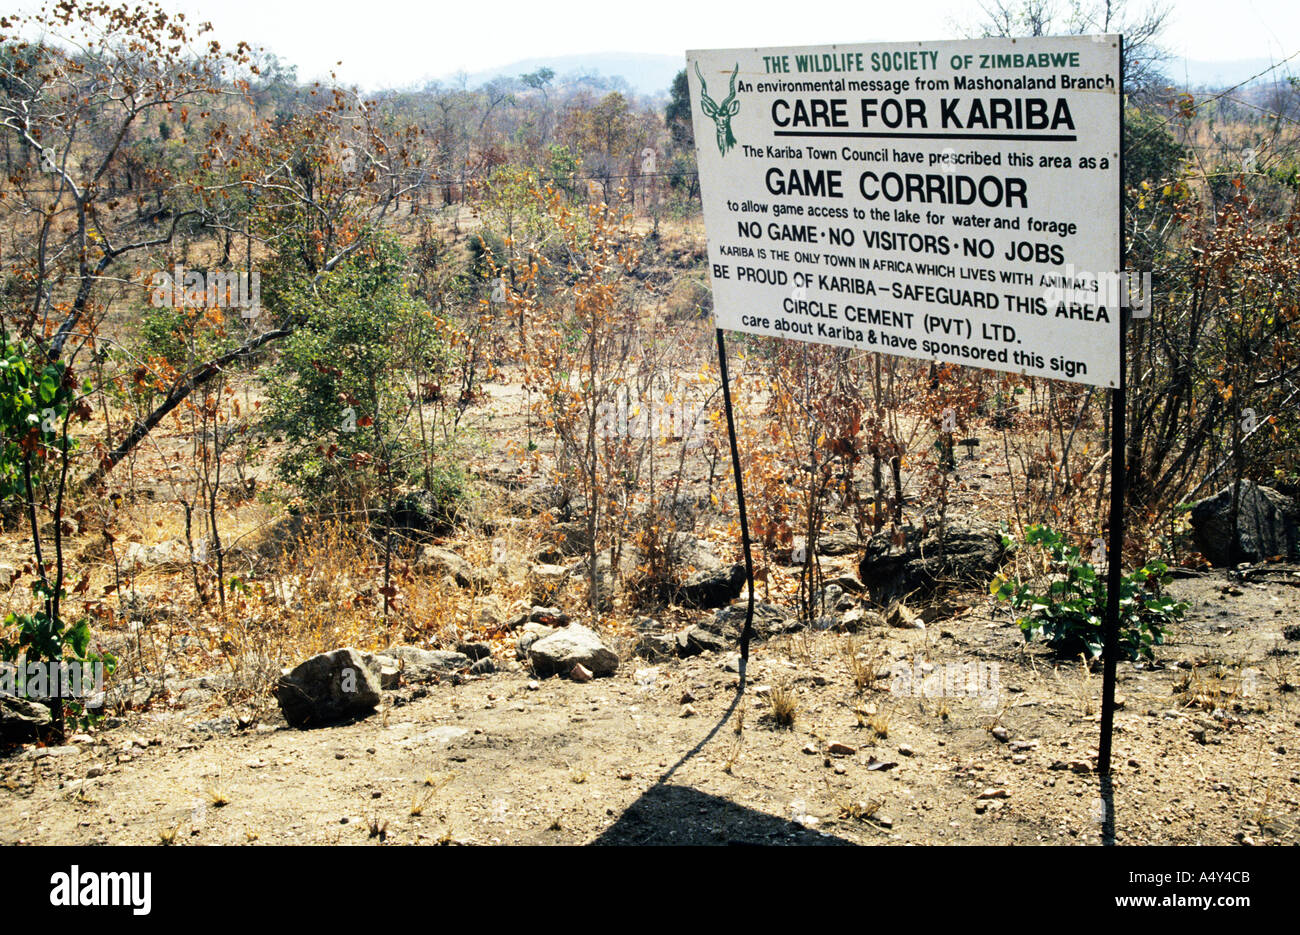 Information sign for game corridor giving animals access to Kariba dam area  for water and linking game to jobs Zimbabwe Stock Photo - Alamy